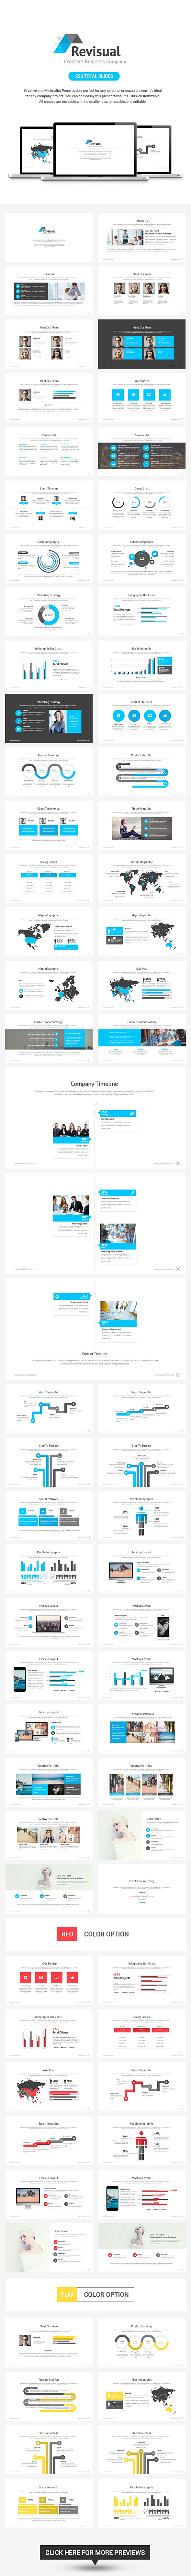 Revisual Powerpoint Template